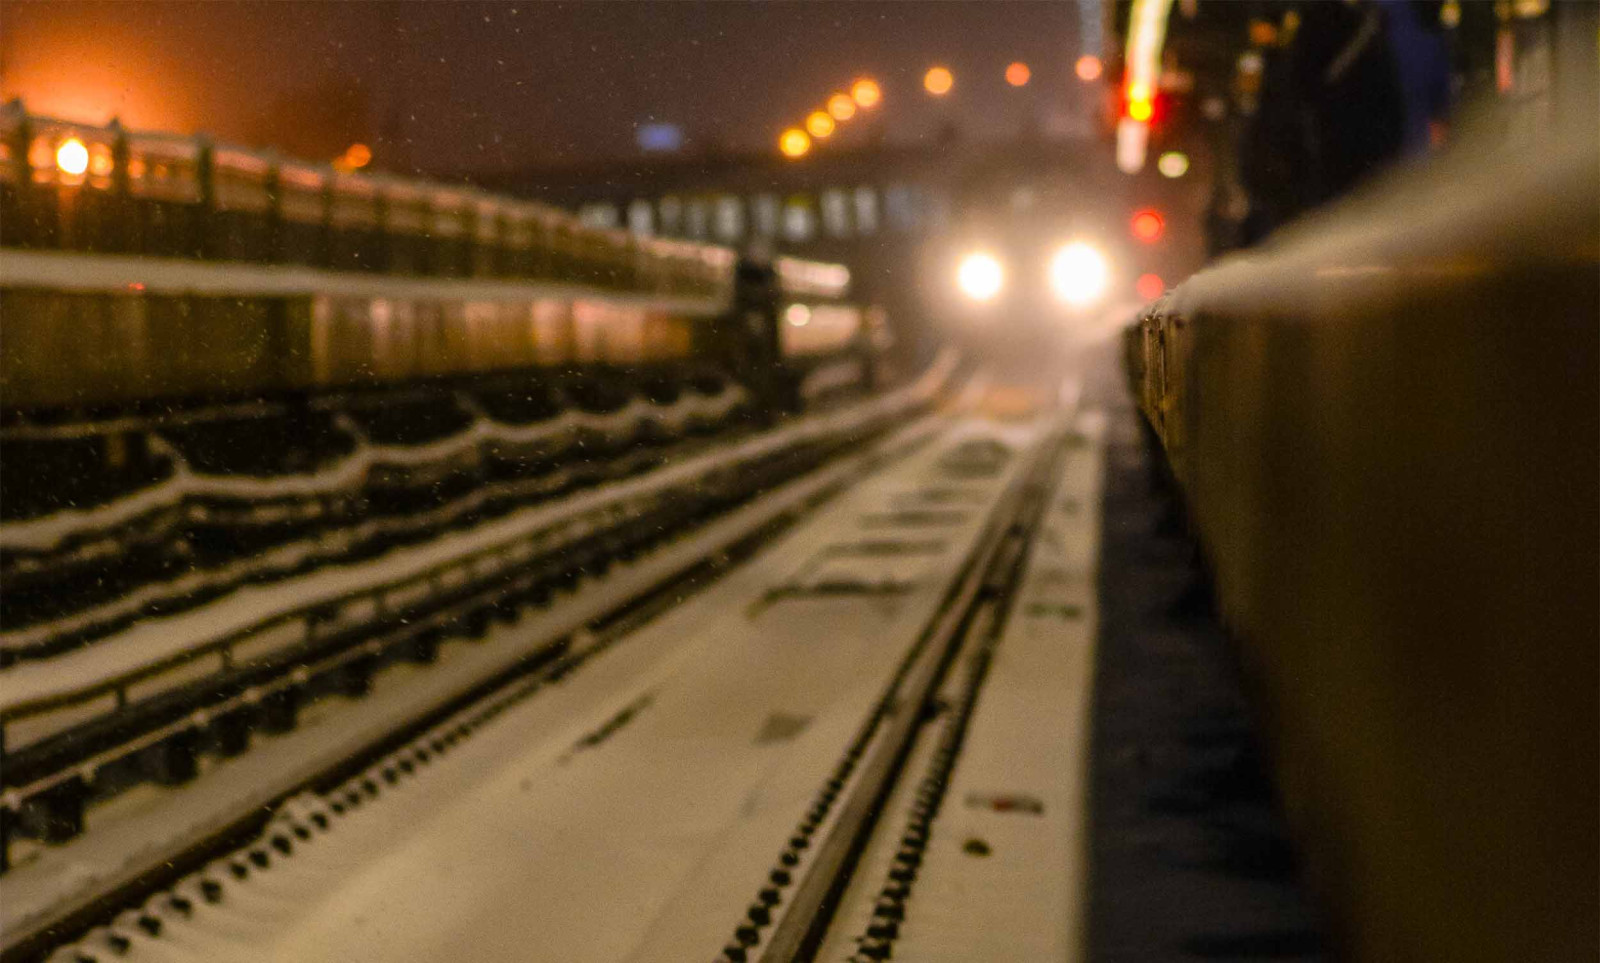 Image of incoming train on snowy tracks